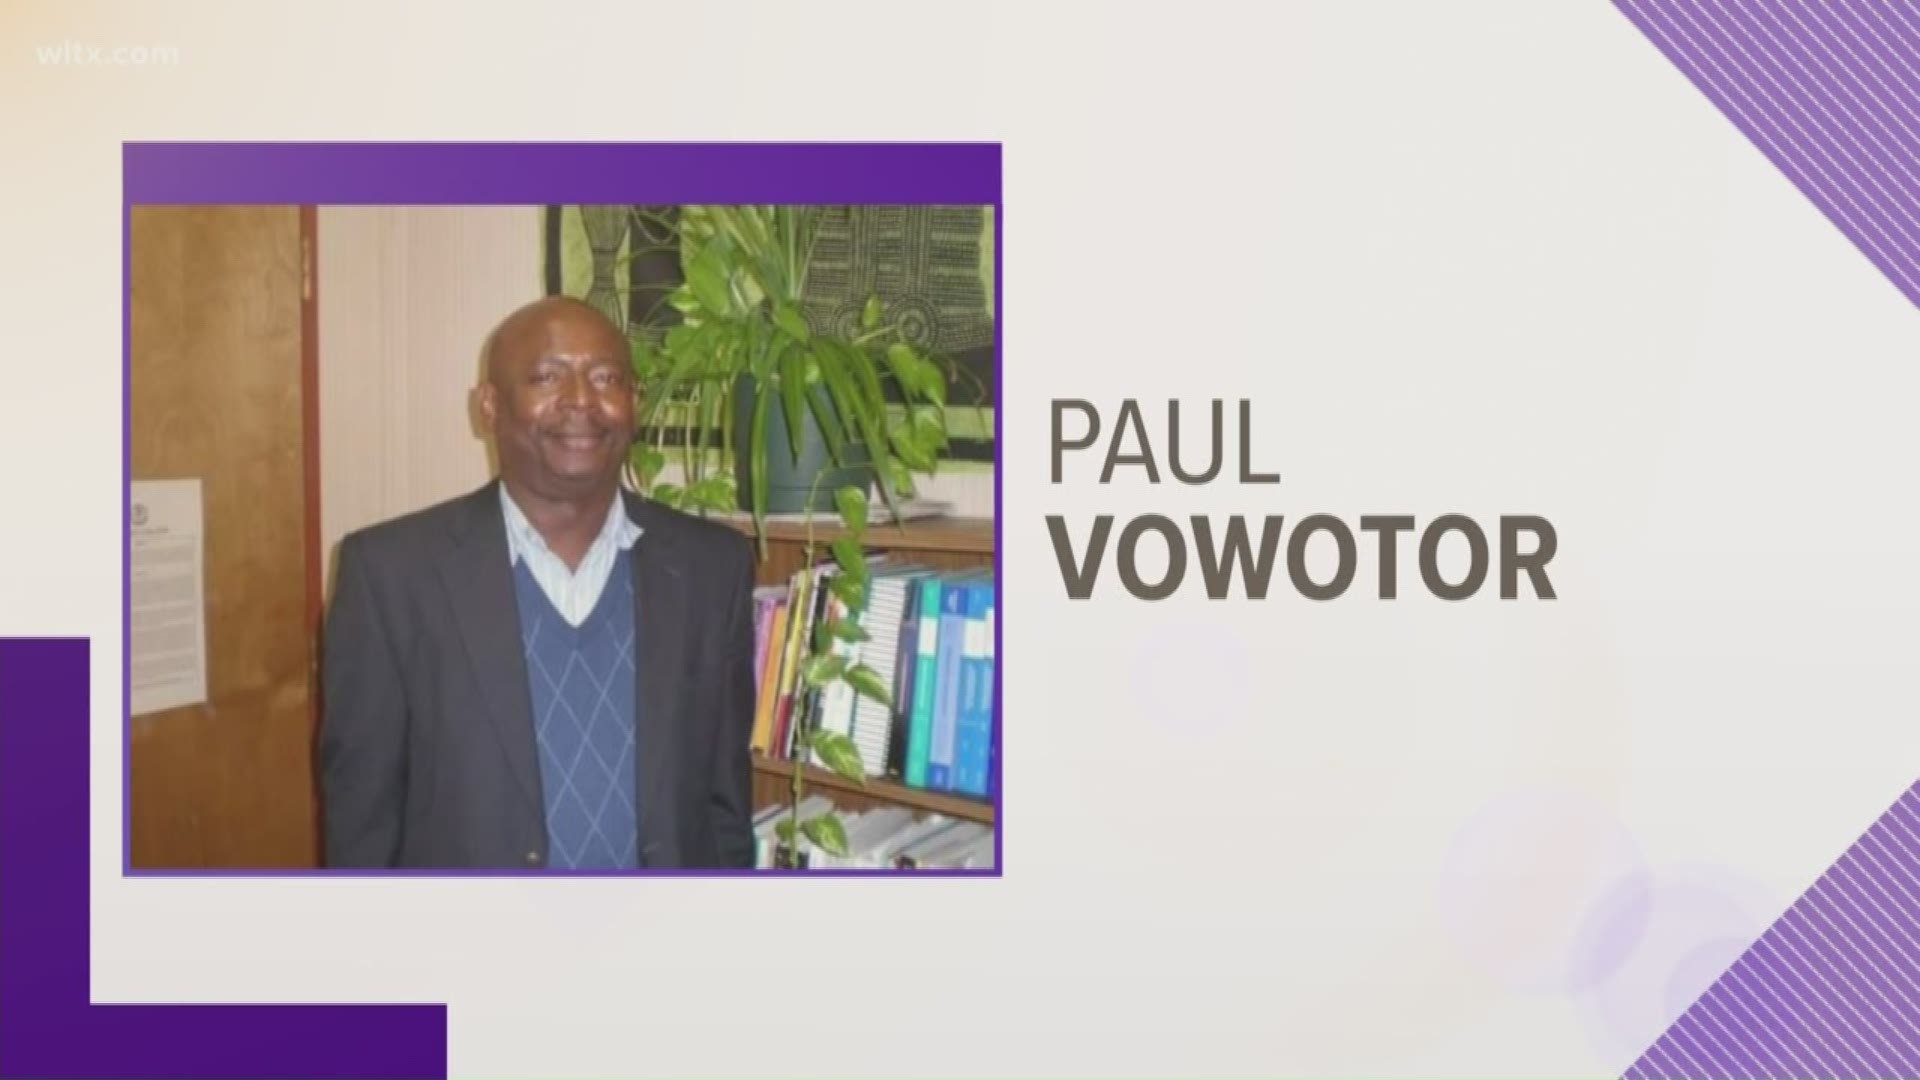 According to Benedict College, Vowotor had been a business instructor for more than 18 years